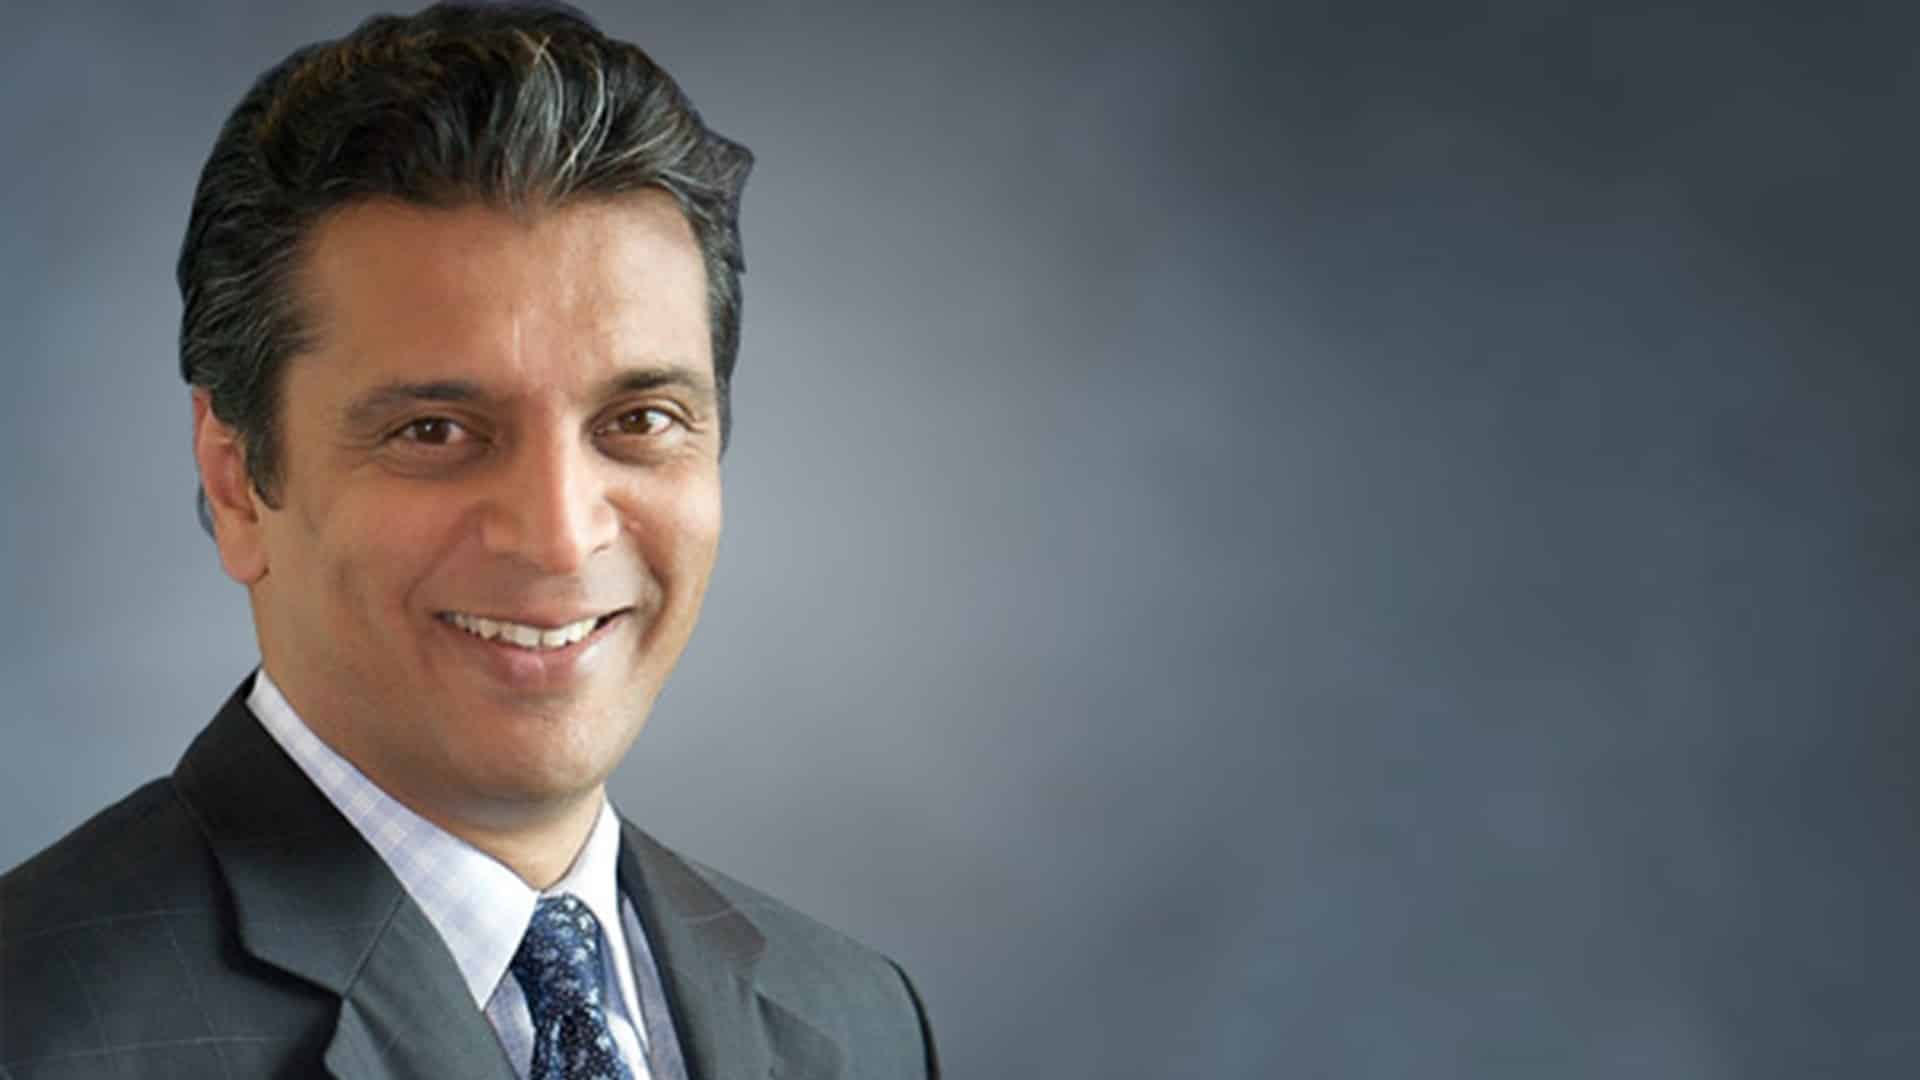 FedEx names Indian American Raj Subramaniam as the new CEO